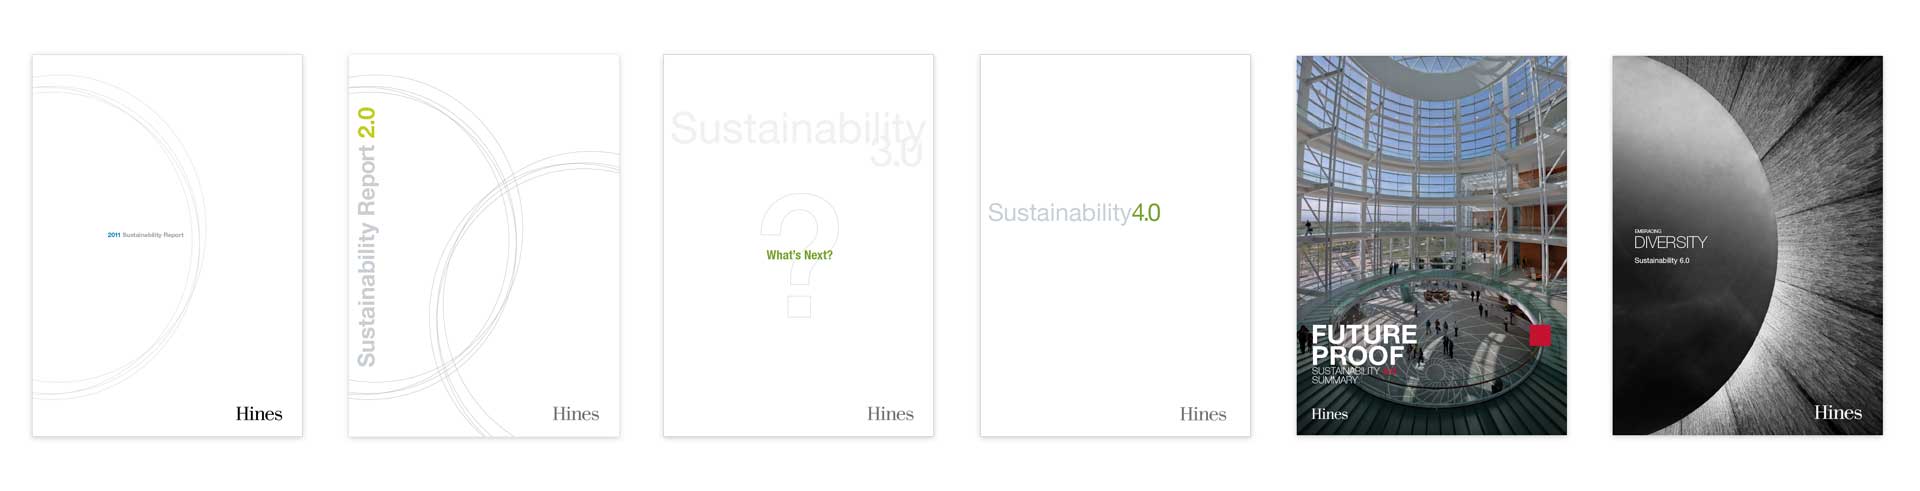 Covers for Sustainability Reports from 2011 to 2016